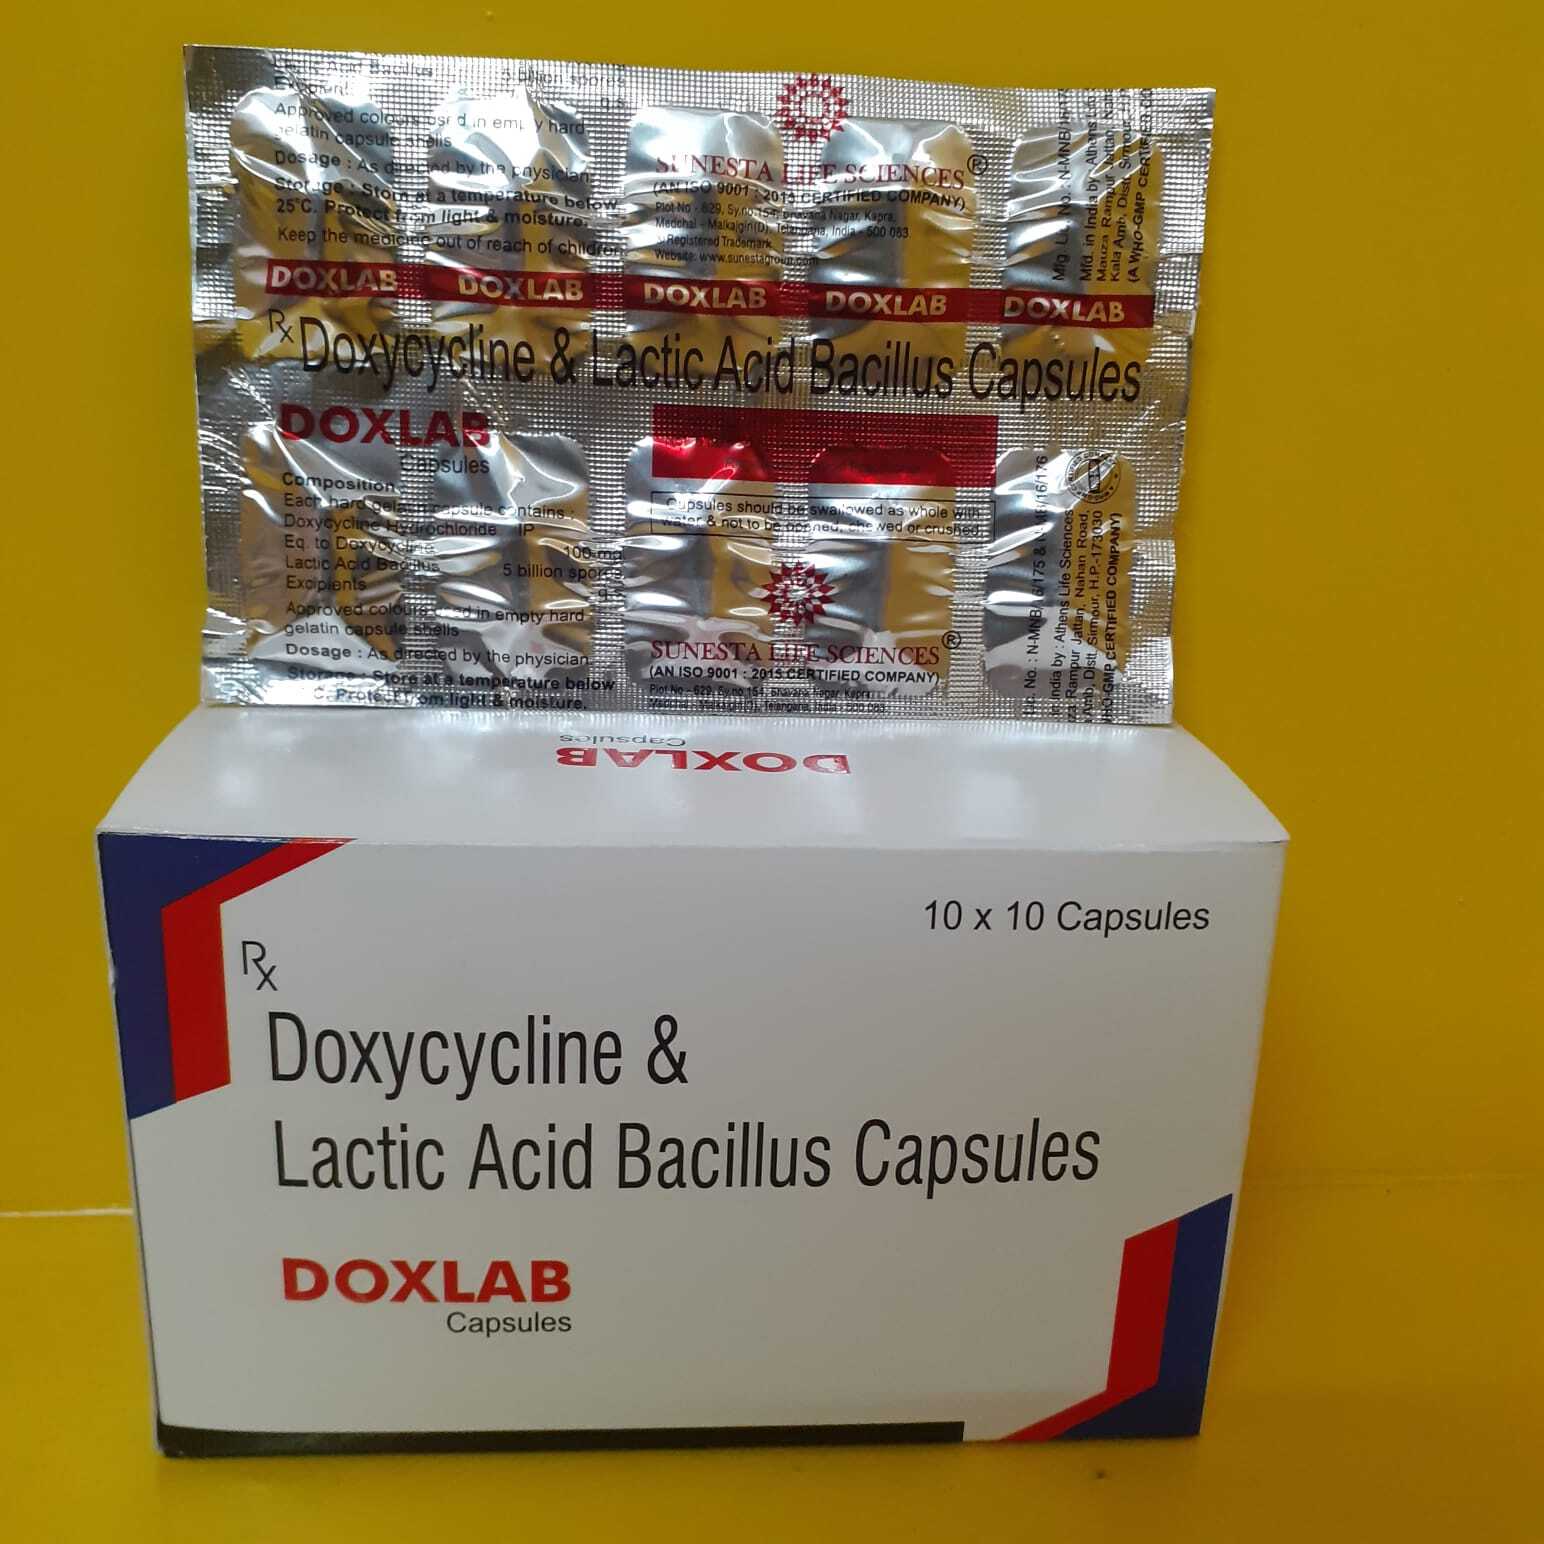 Doxycycline 100 mg with lacticacid 5 bacillus capsules